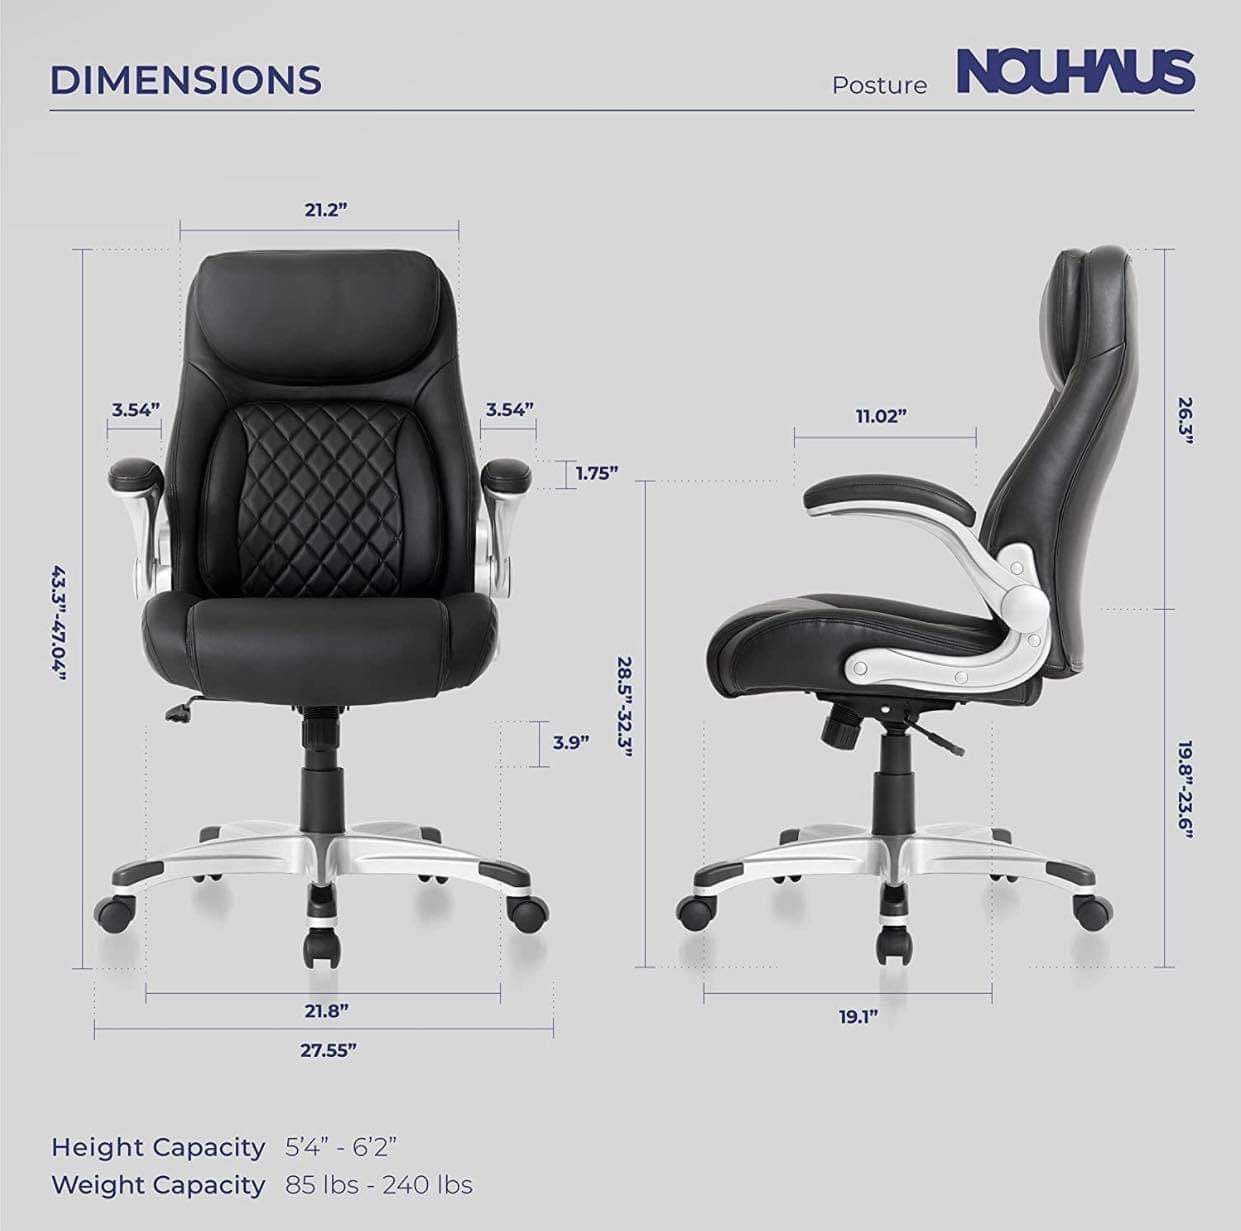 BRAND NEW🔥🔥🔥 NOUHAUS +Posture Ergonomic PU Leather Office Chair. Click5 Lumbar Support with FlipAdjust Armrests. Modern Executive Chair and Compute